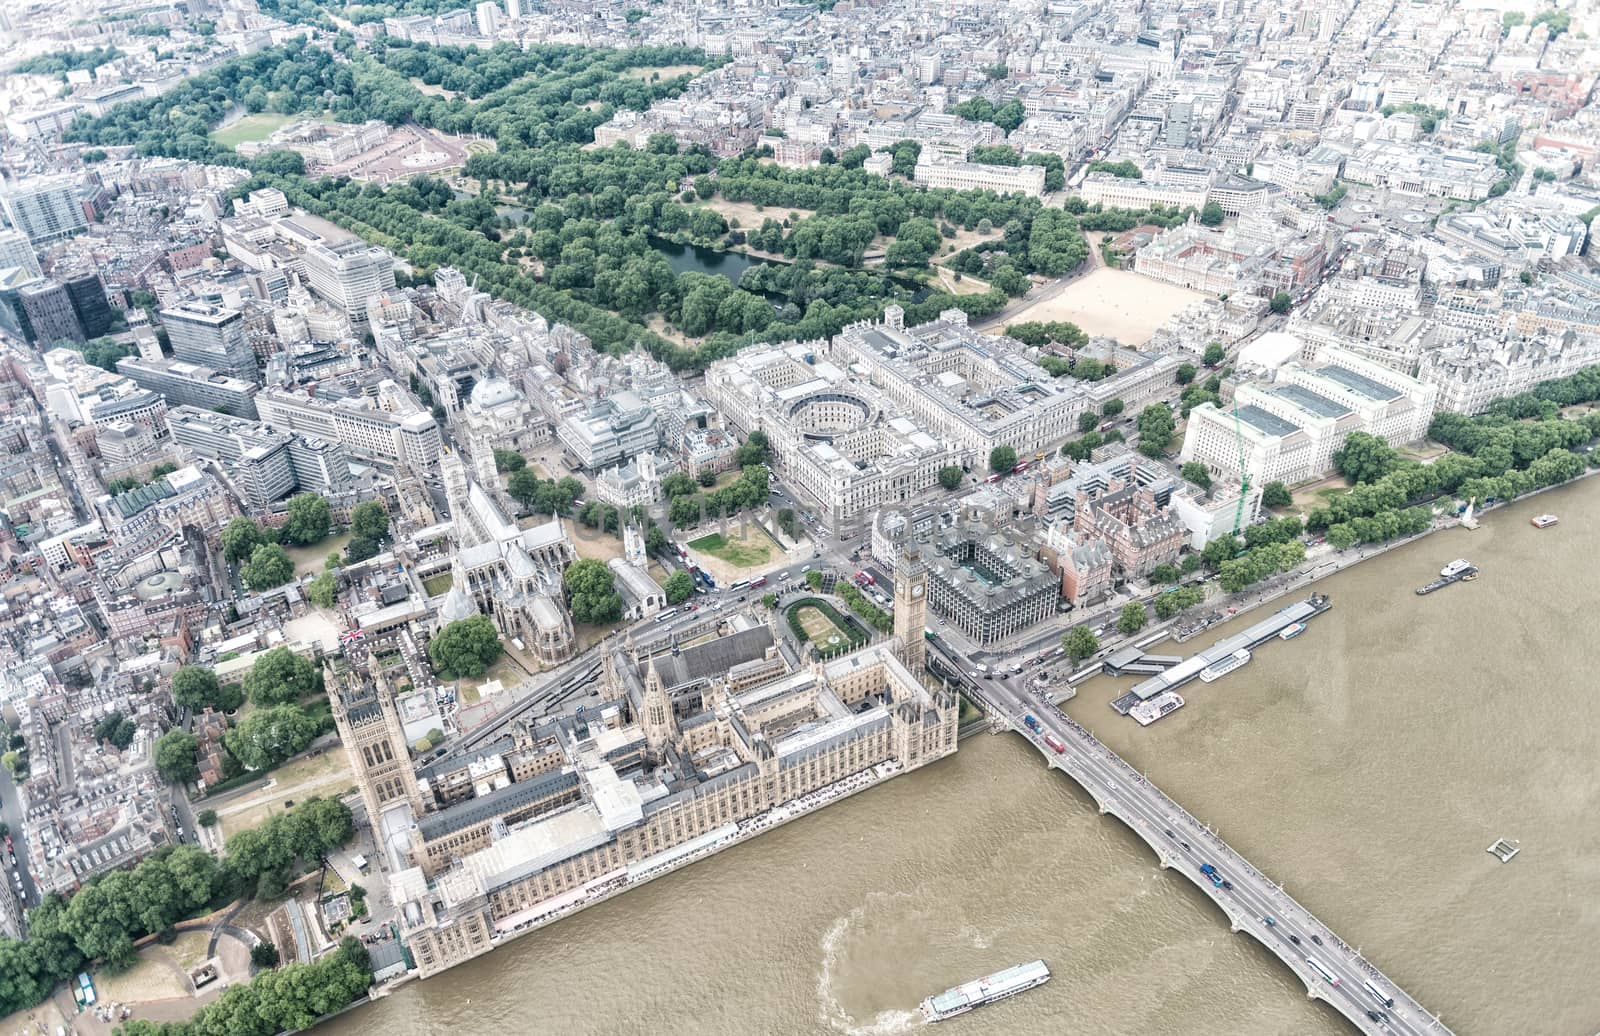 London. Helicopter view of Westminster Palace and Bridge on a beautiful summer day.